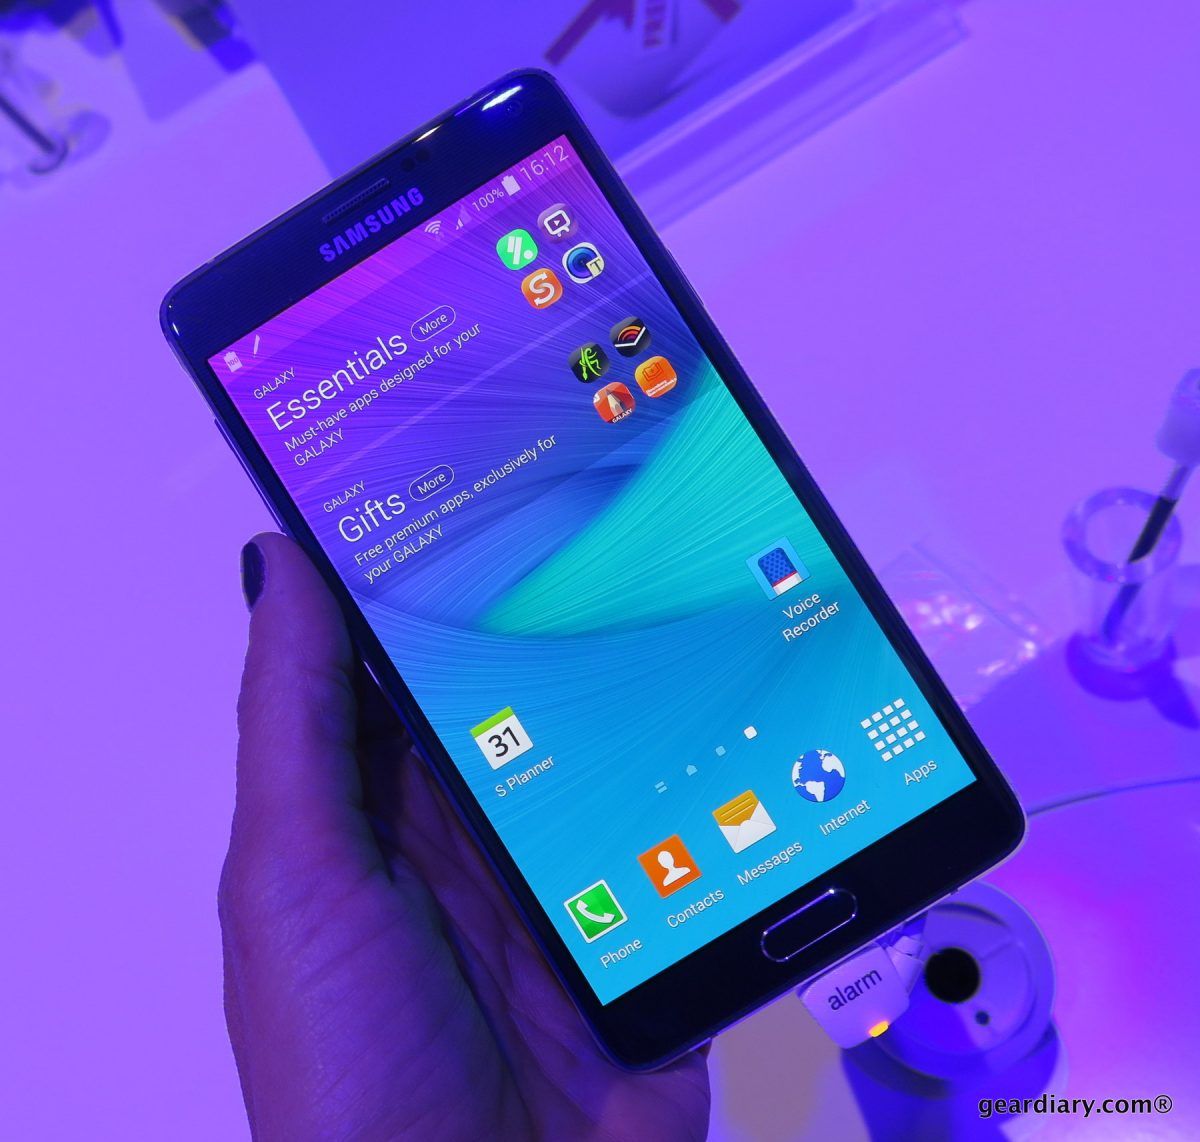 Pre-Orders for the Samsung Galaxy Note 4 Start Tomorrow